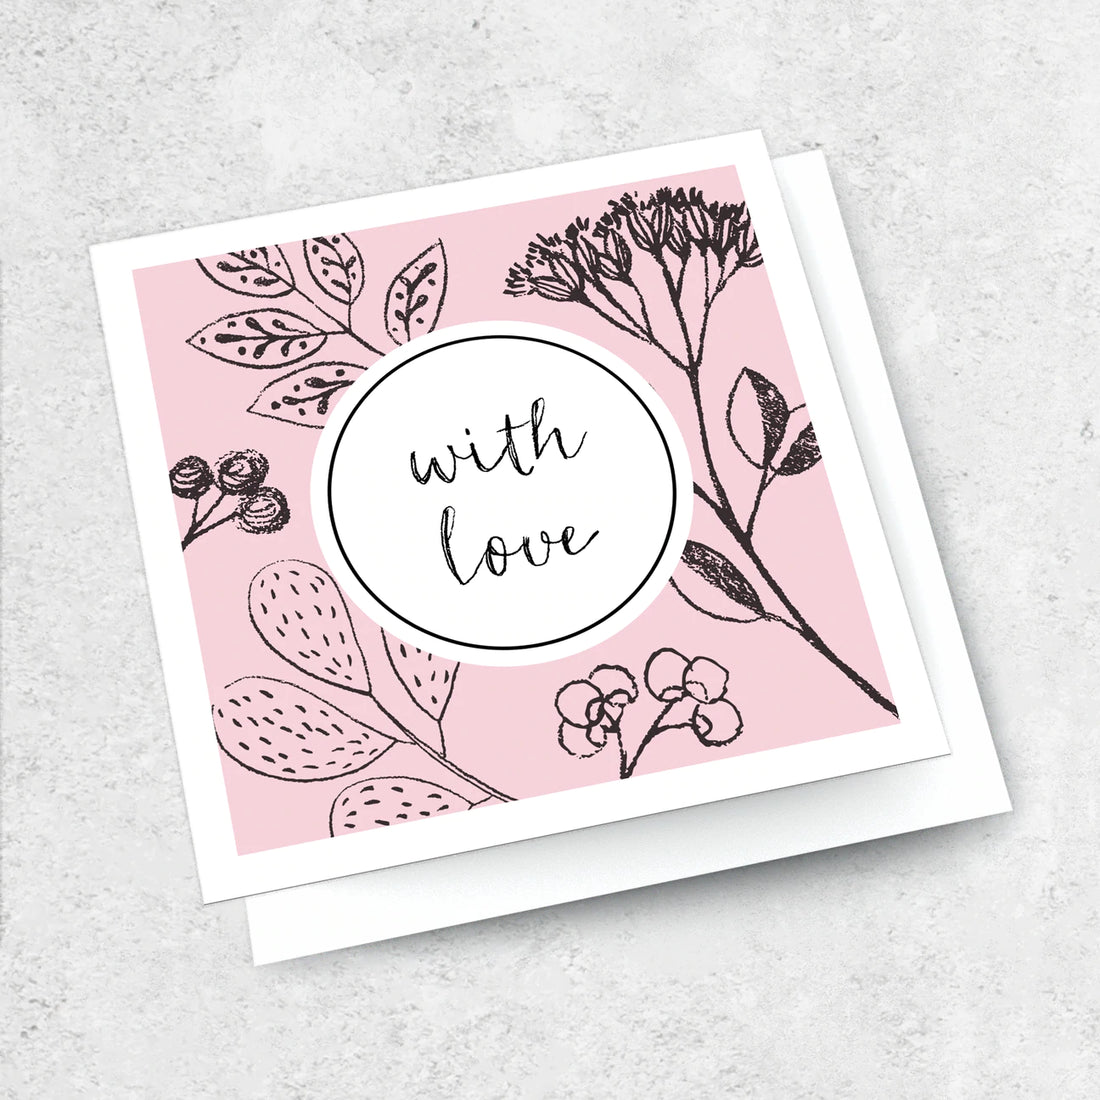 Greeting card, pink background with black flowers 